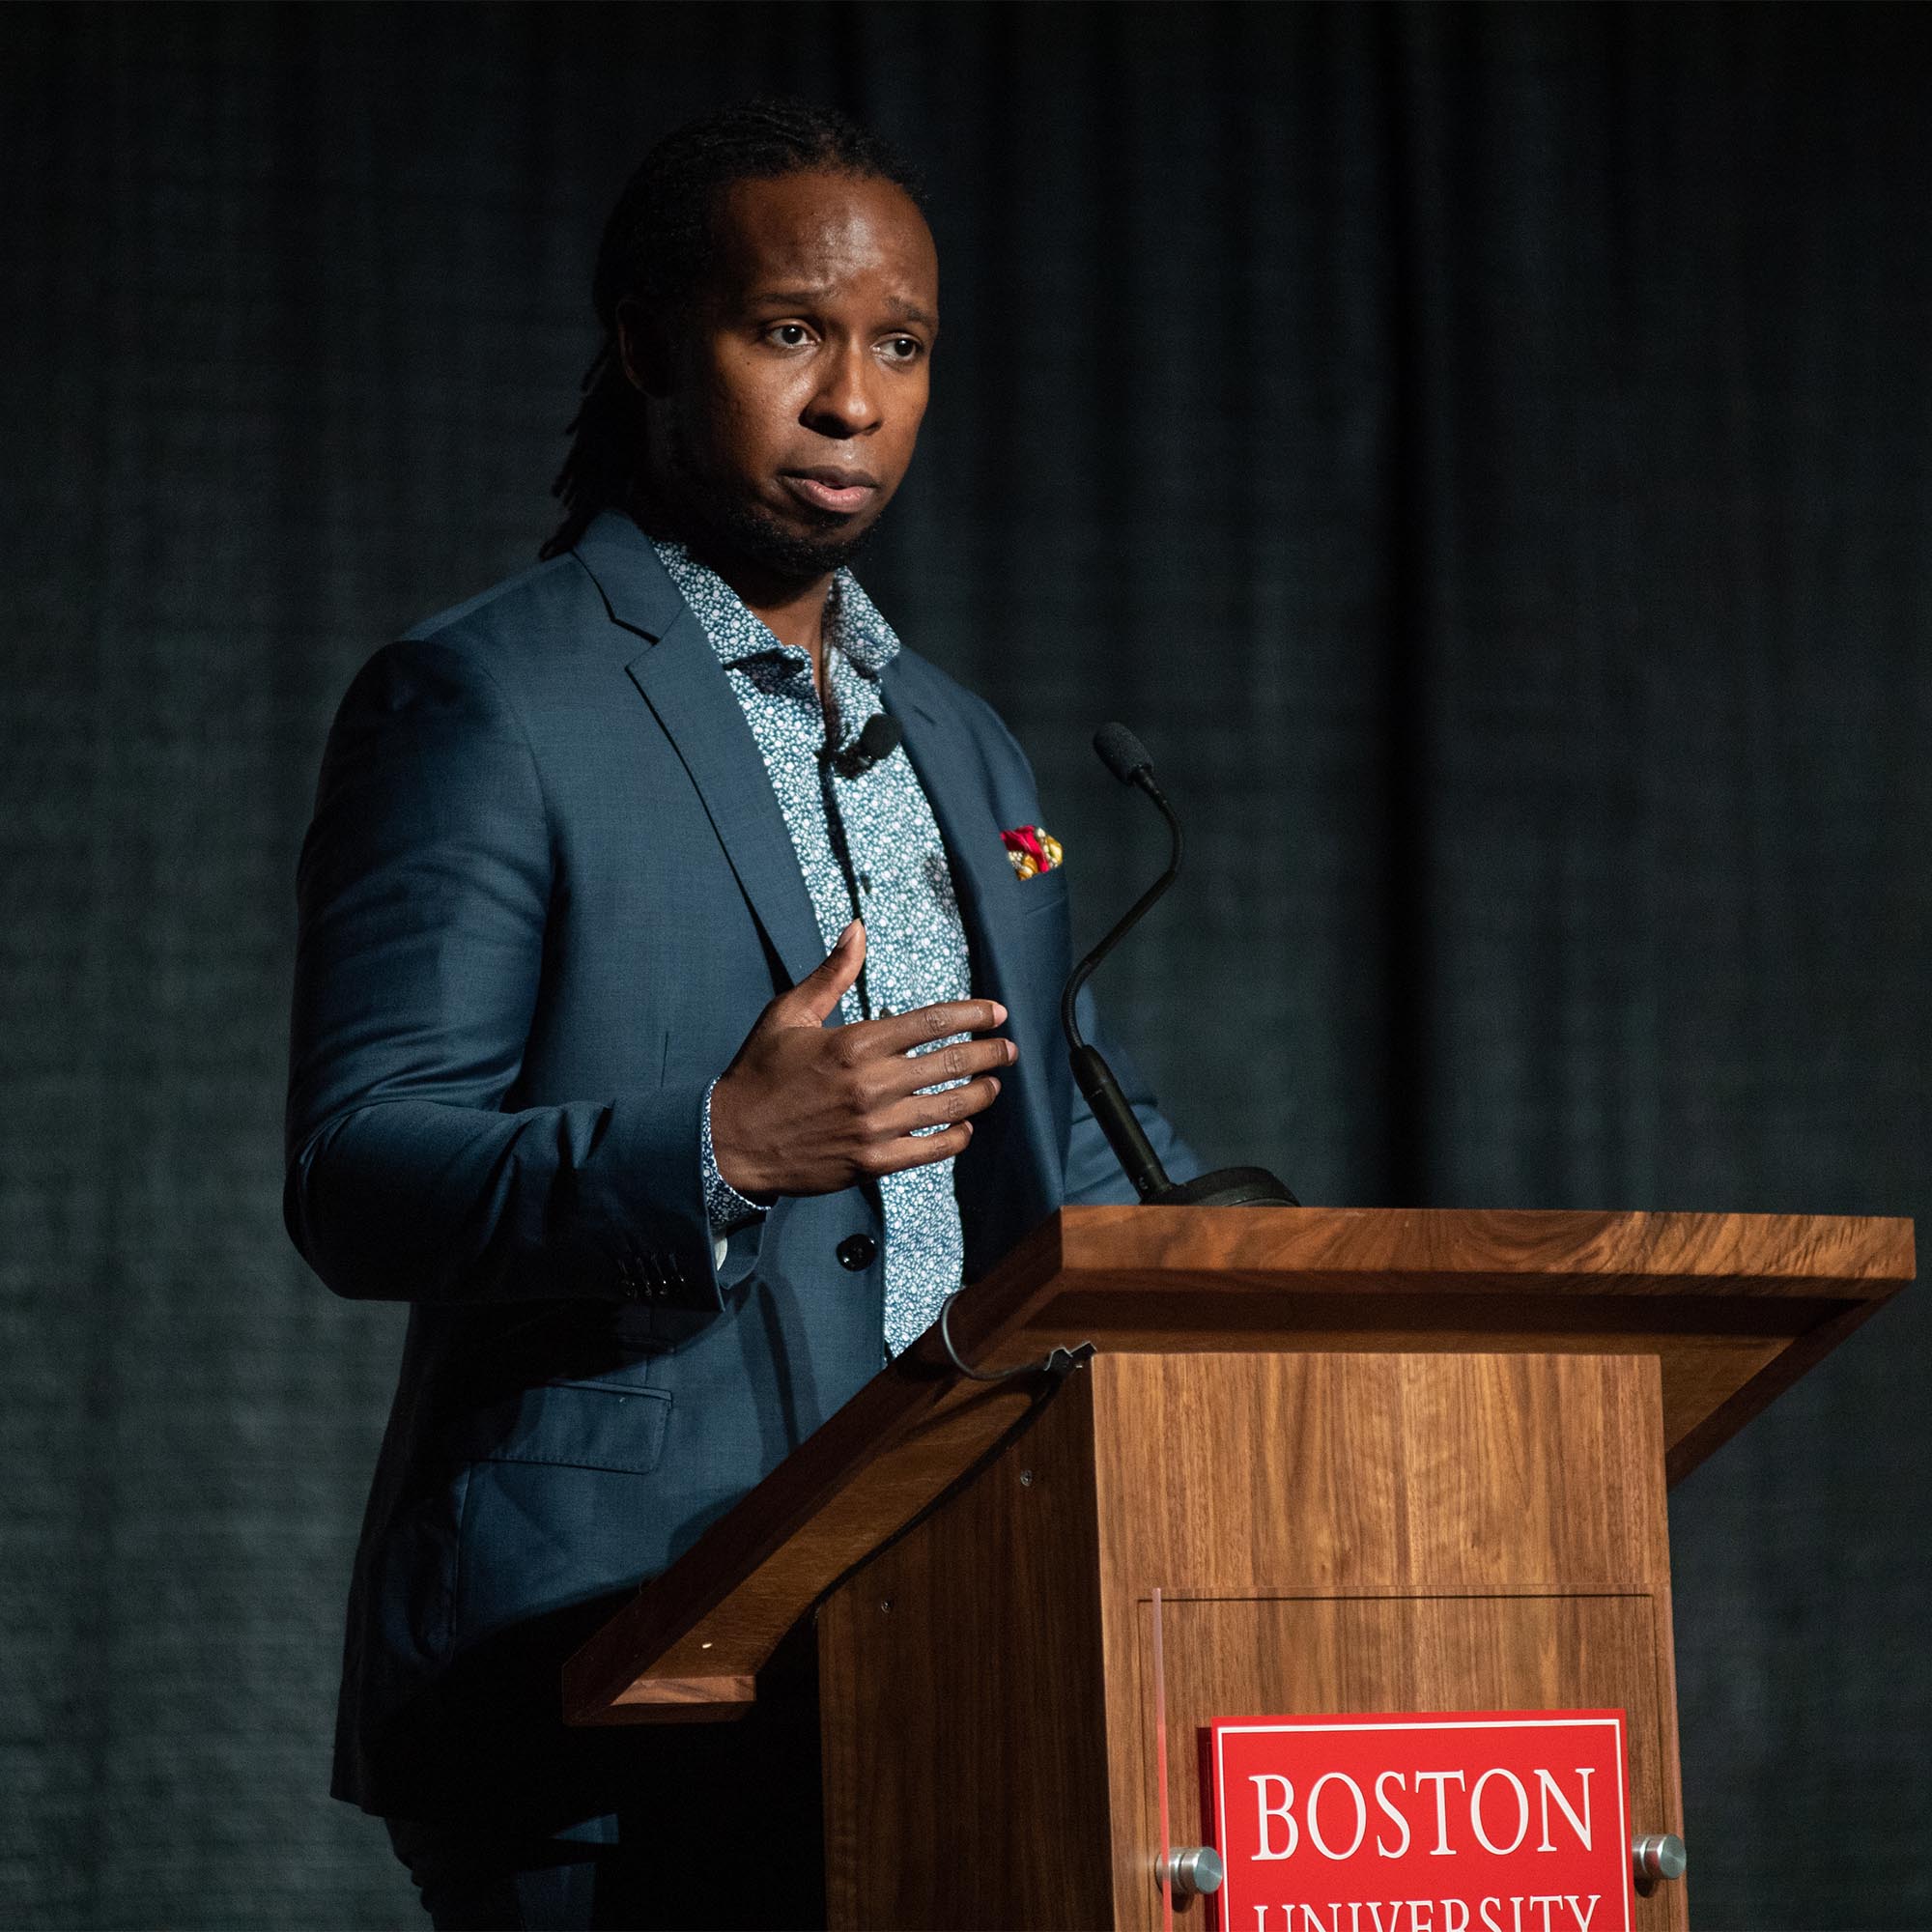 Photo: Dr Ibram X Kendi, a black man with dreadlocks wearing a suit and tie, at What the Science Tells Us: Racial Health and Economic Inequities during the Pandemic Symposium presented by The BU Center for Antiracist Research in the Metcalf Hall October 1. Photo by Cydney Scott